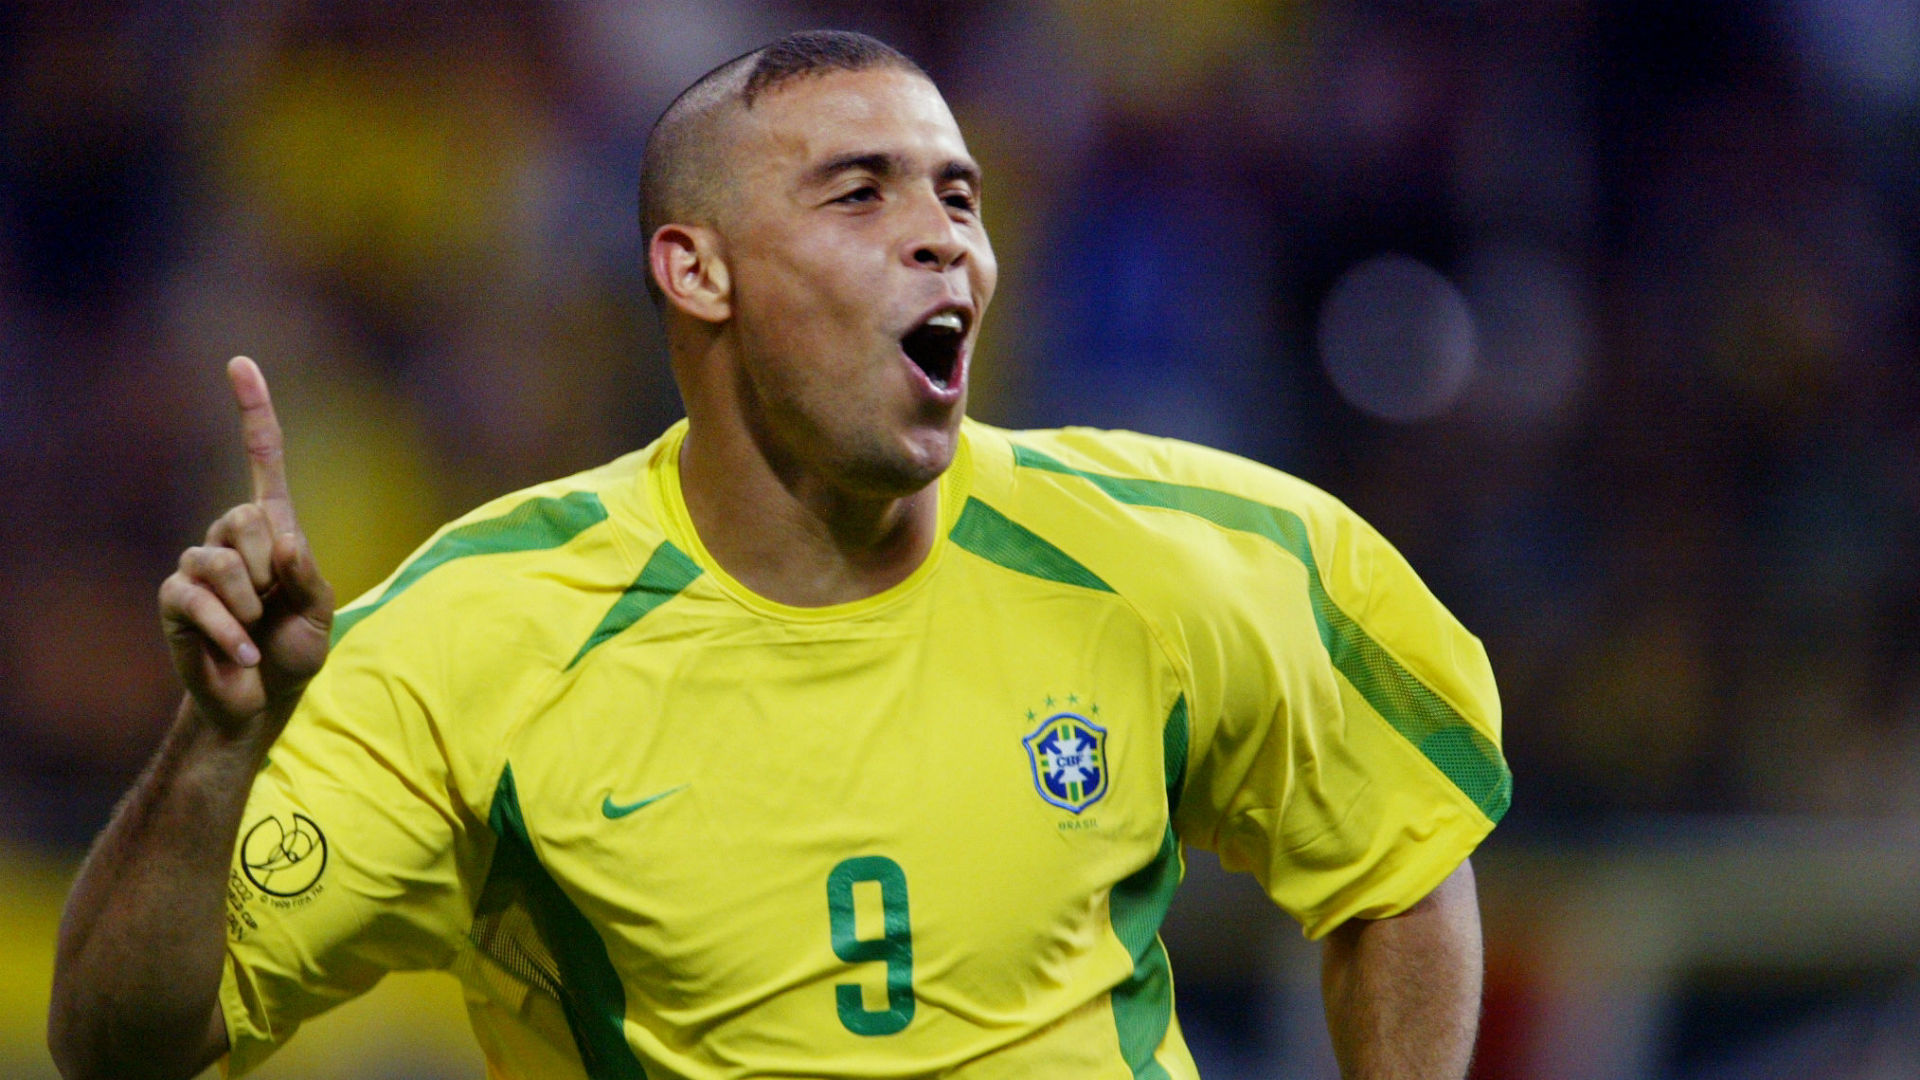 Brazil legend Ronaldo the best player in history says AC Milan